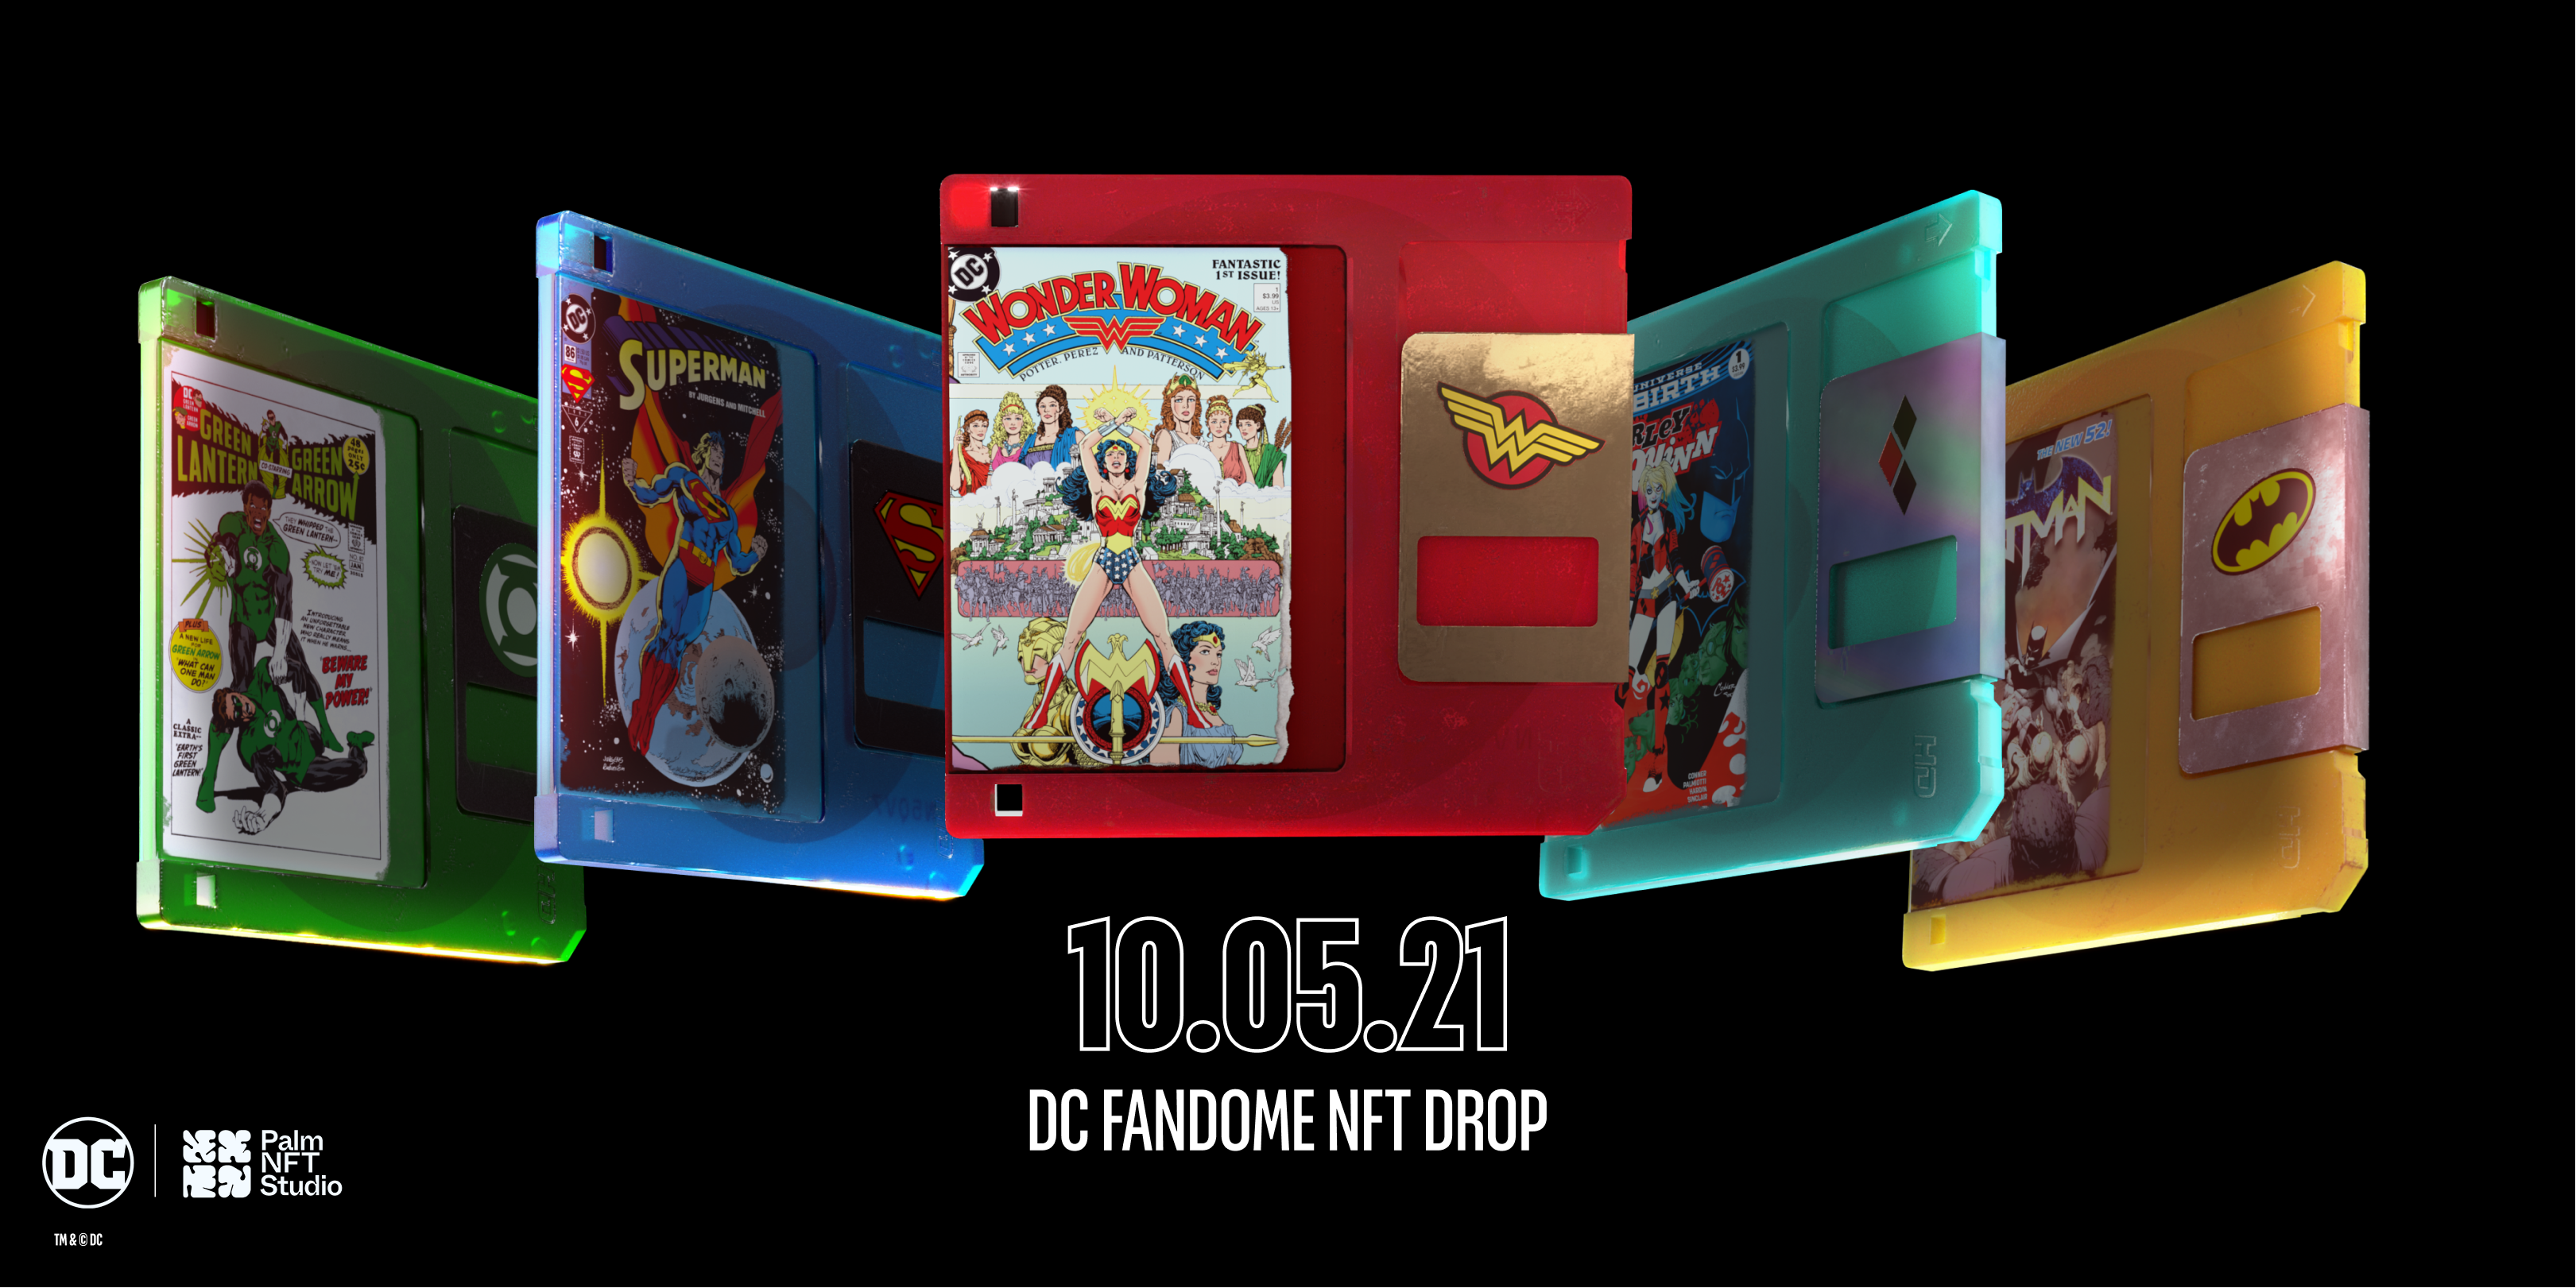 DC Partners With Palm NFT Studio for Epic Digital Collectibles Drop for DC FanDome 2021